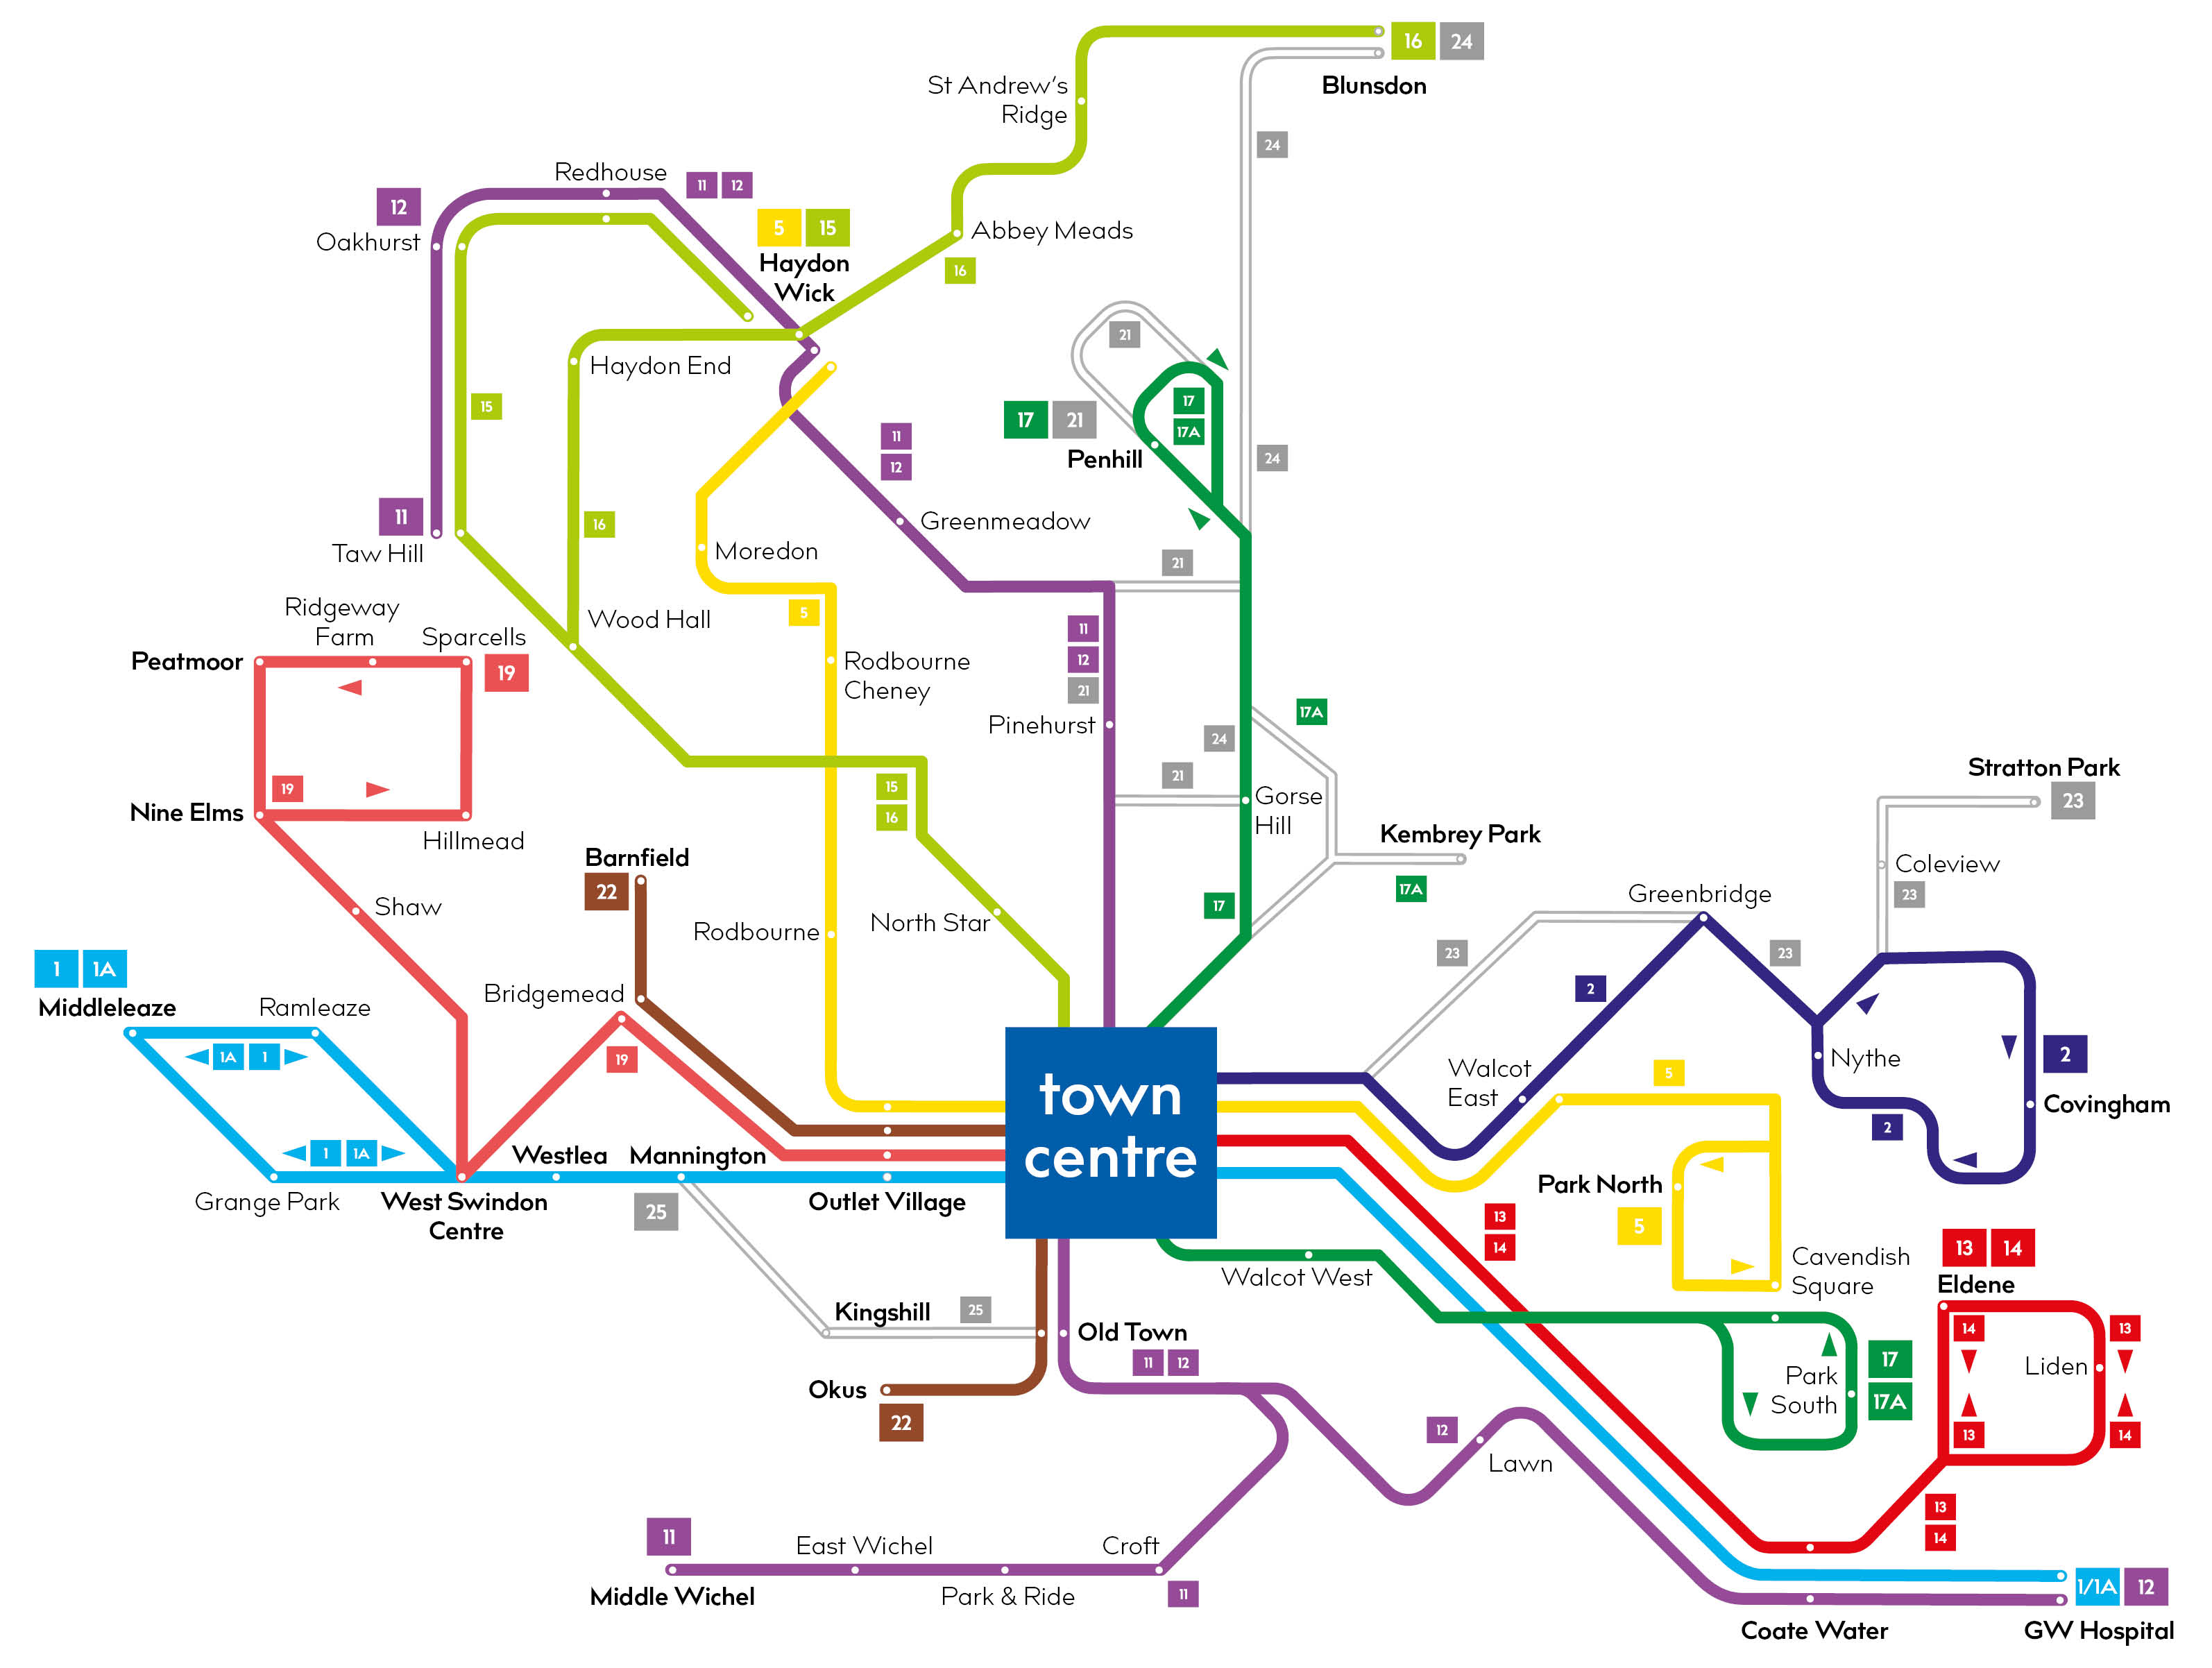 Network Map